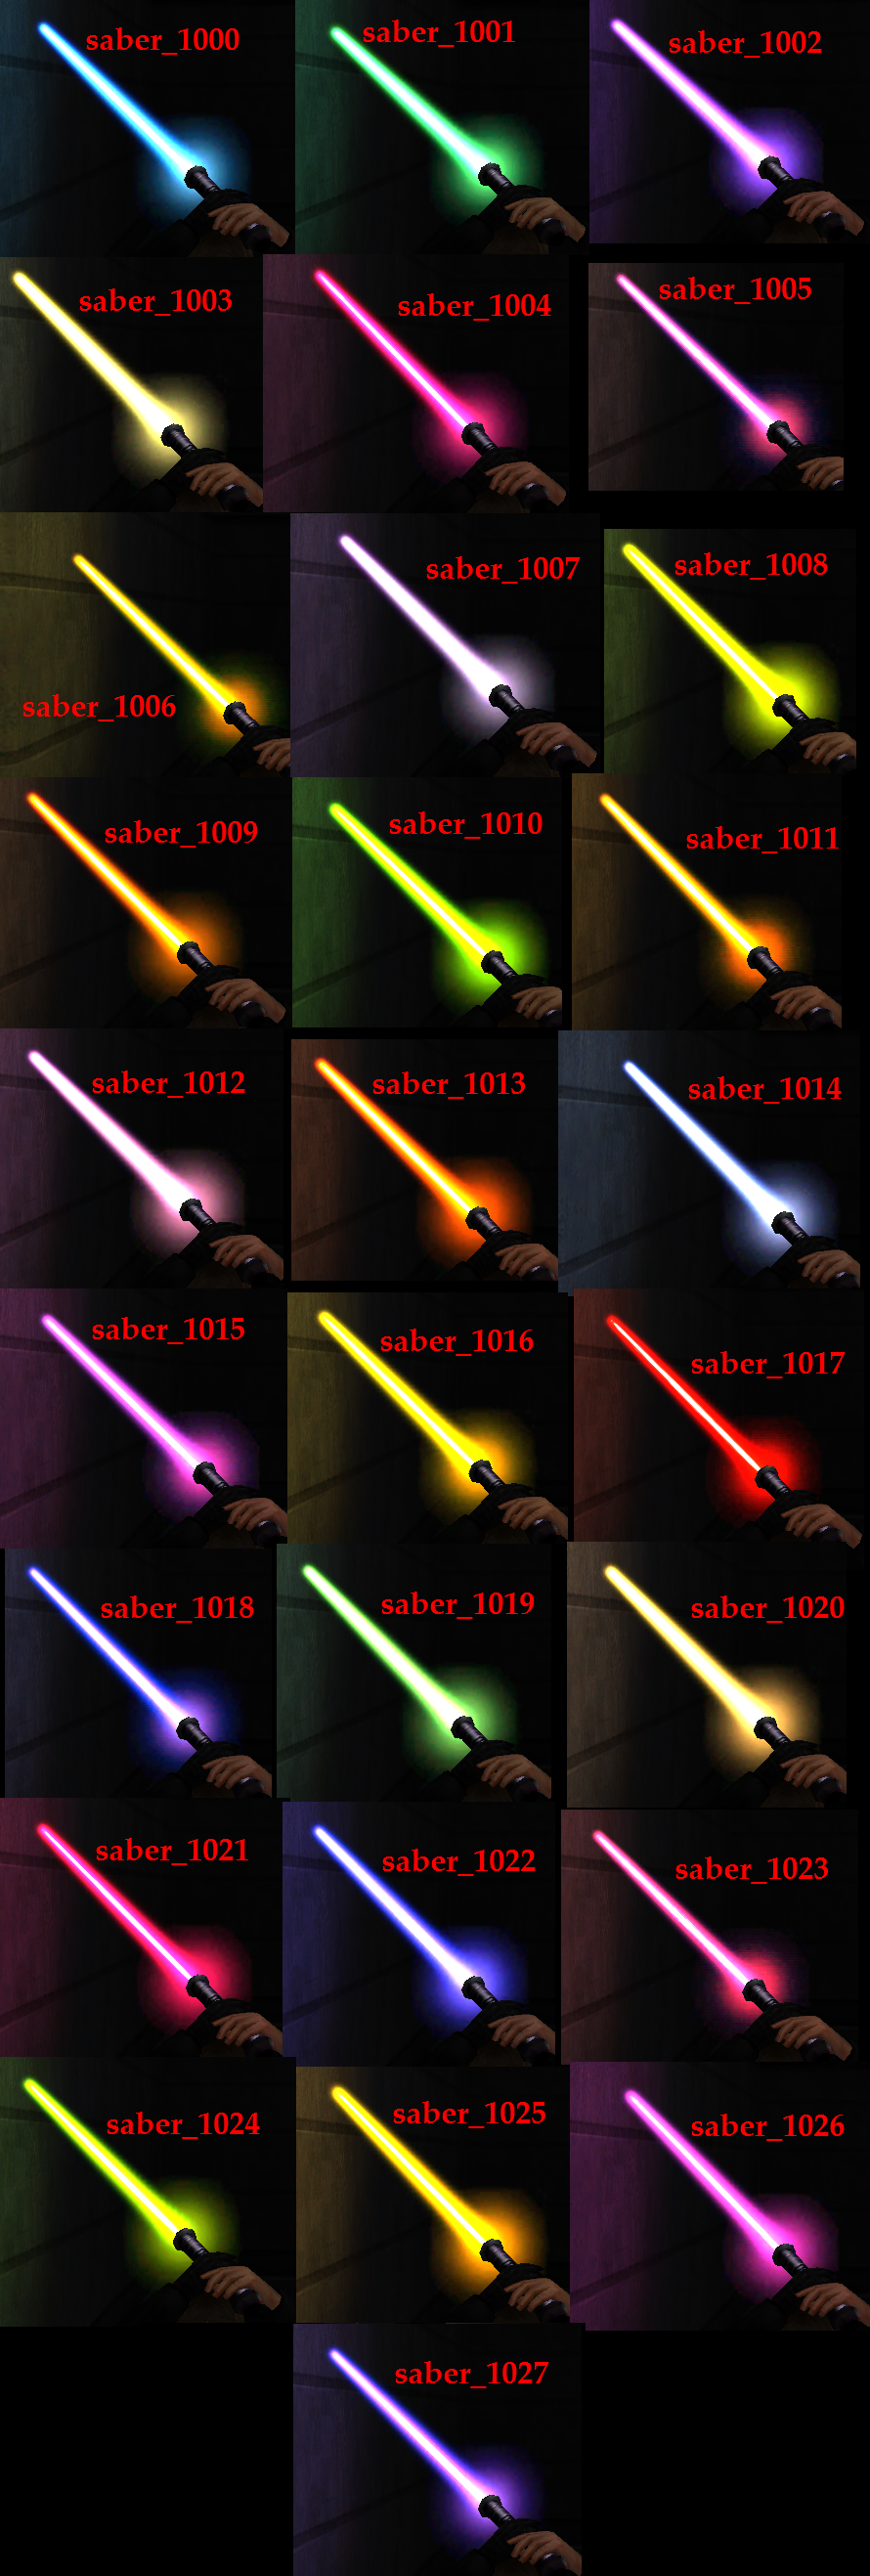 More information about "28 New Saber Colors"